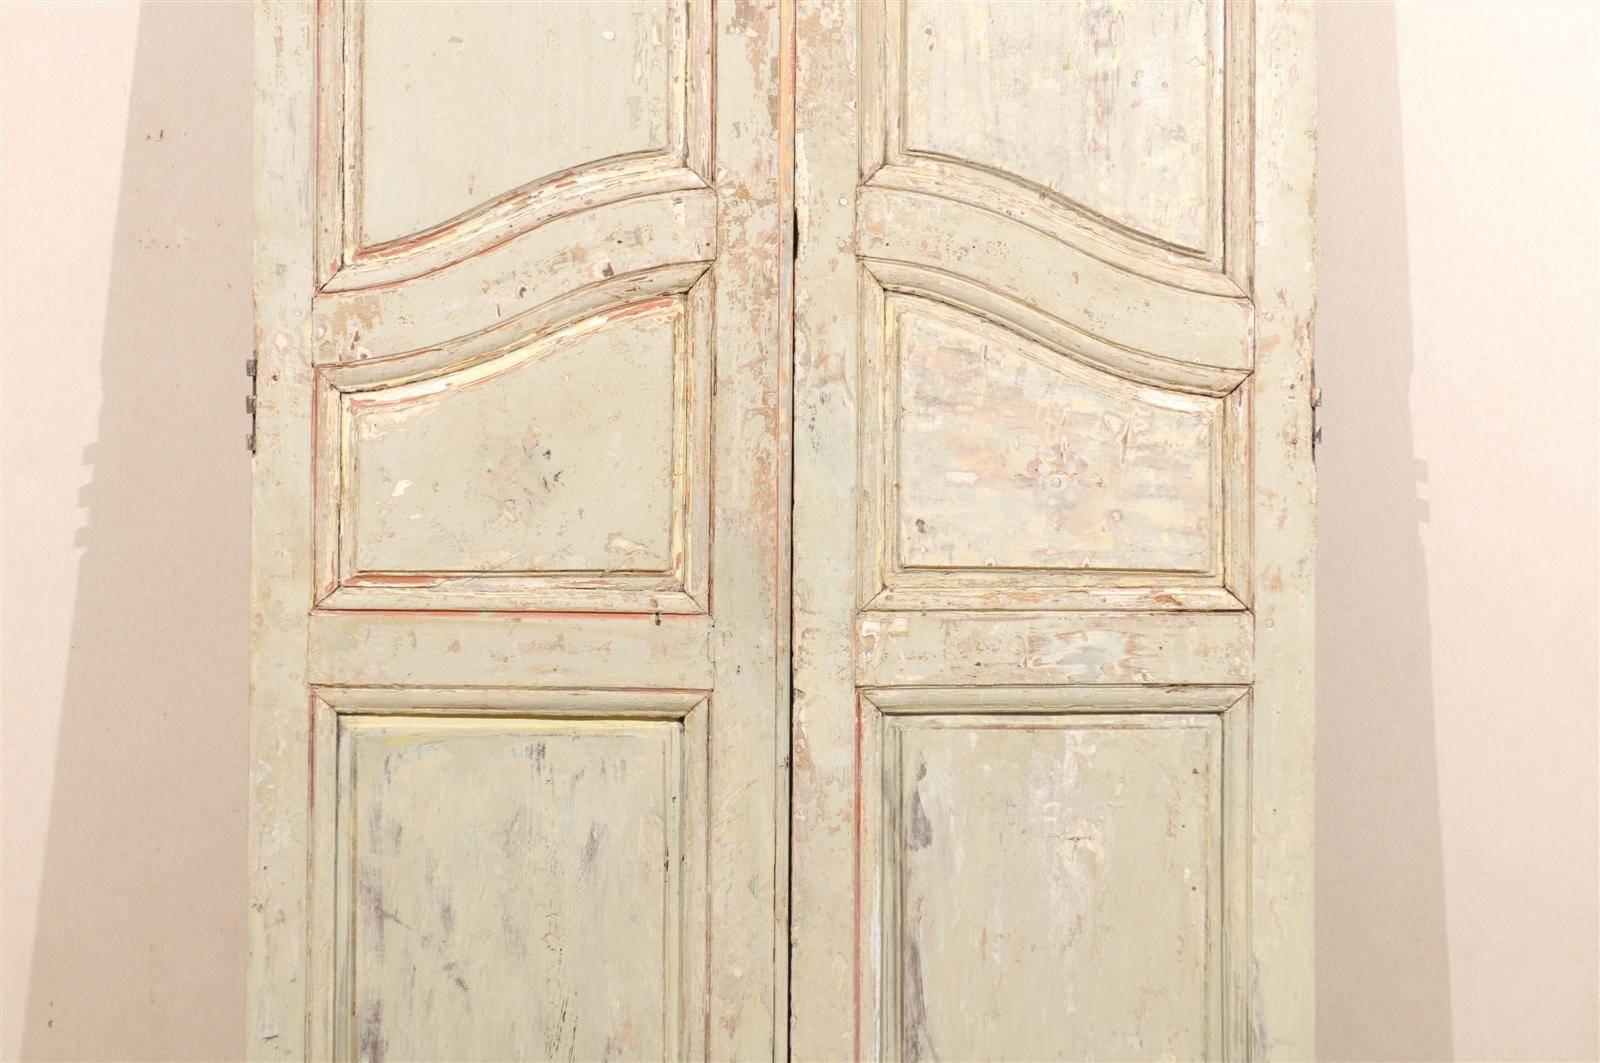 A pair of tall French doors from the early 19th century with curvy raised panels in the center and original finish. These doors would be perfect on rails to separate rooms. The appropriate hardware would have to be added.
 